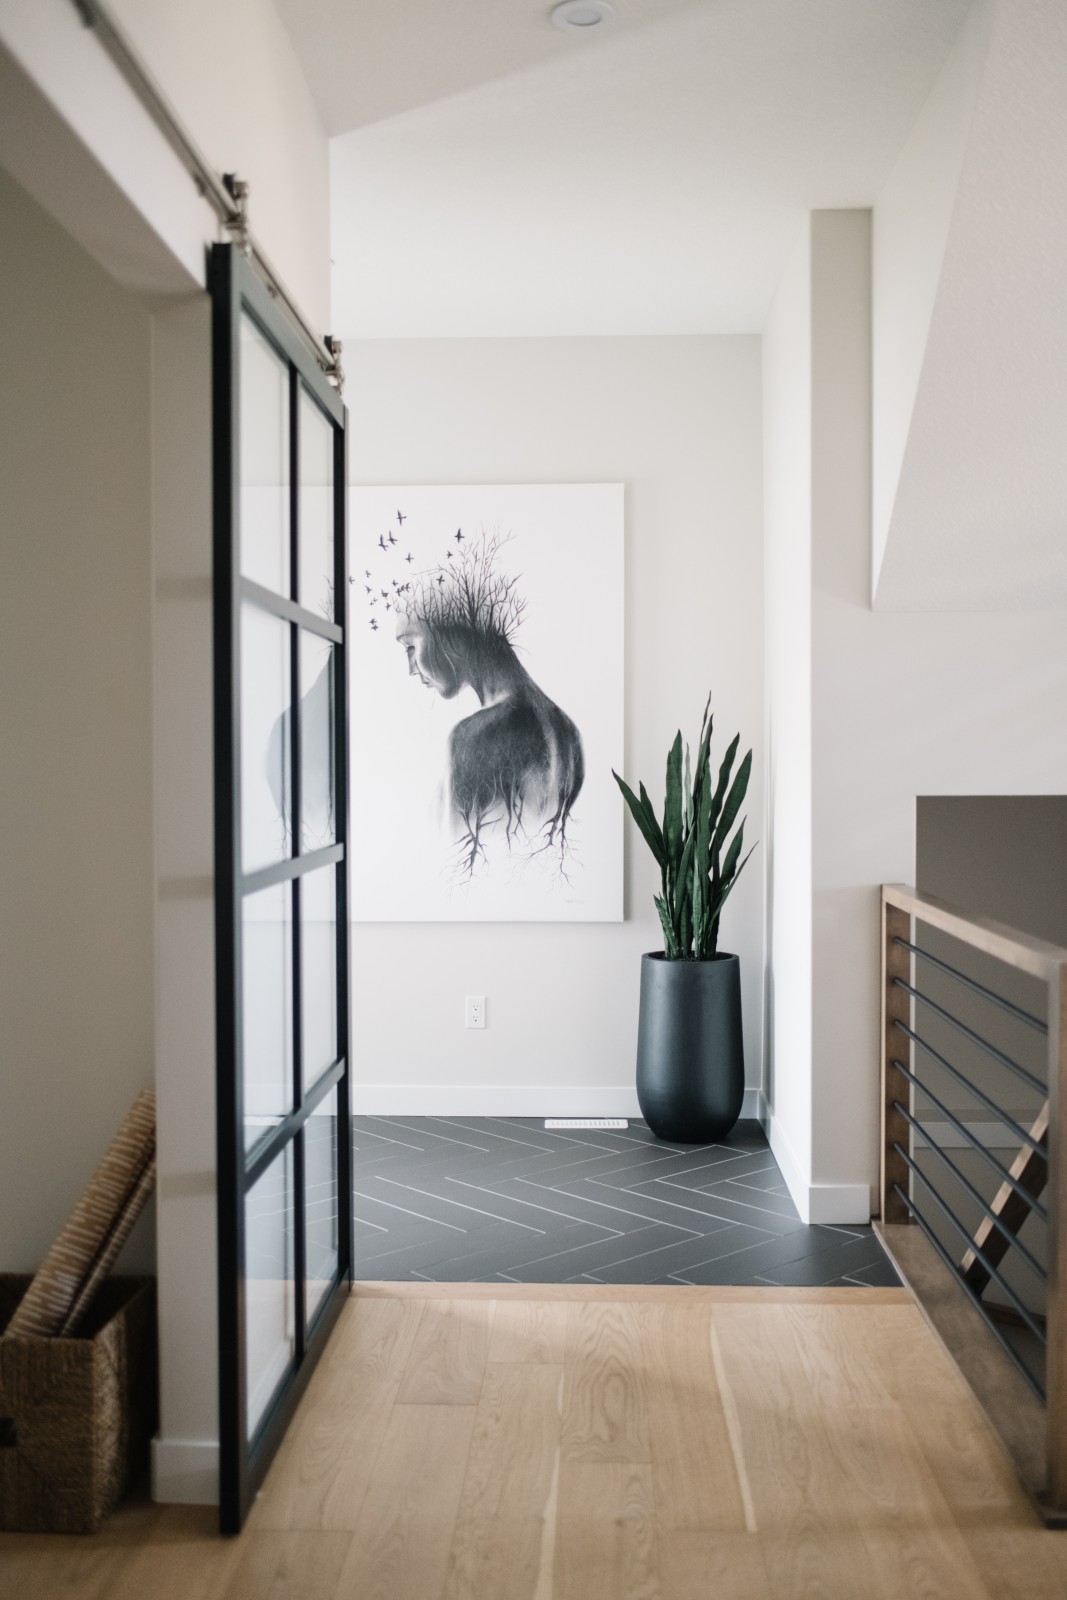 The front foyer of the Nysa showhome with black herringbone floor tile, white walls, modern black and white art of a woman. A black and glass barn door can be seen leading to a room to the left